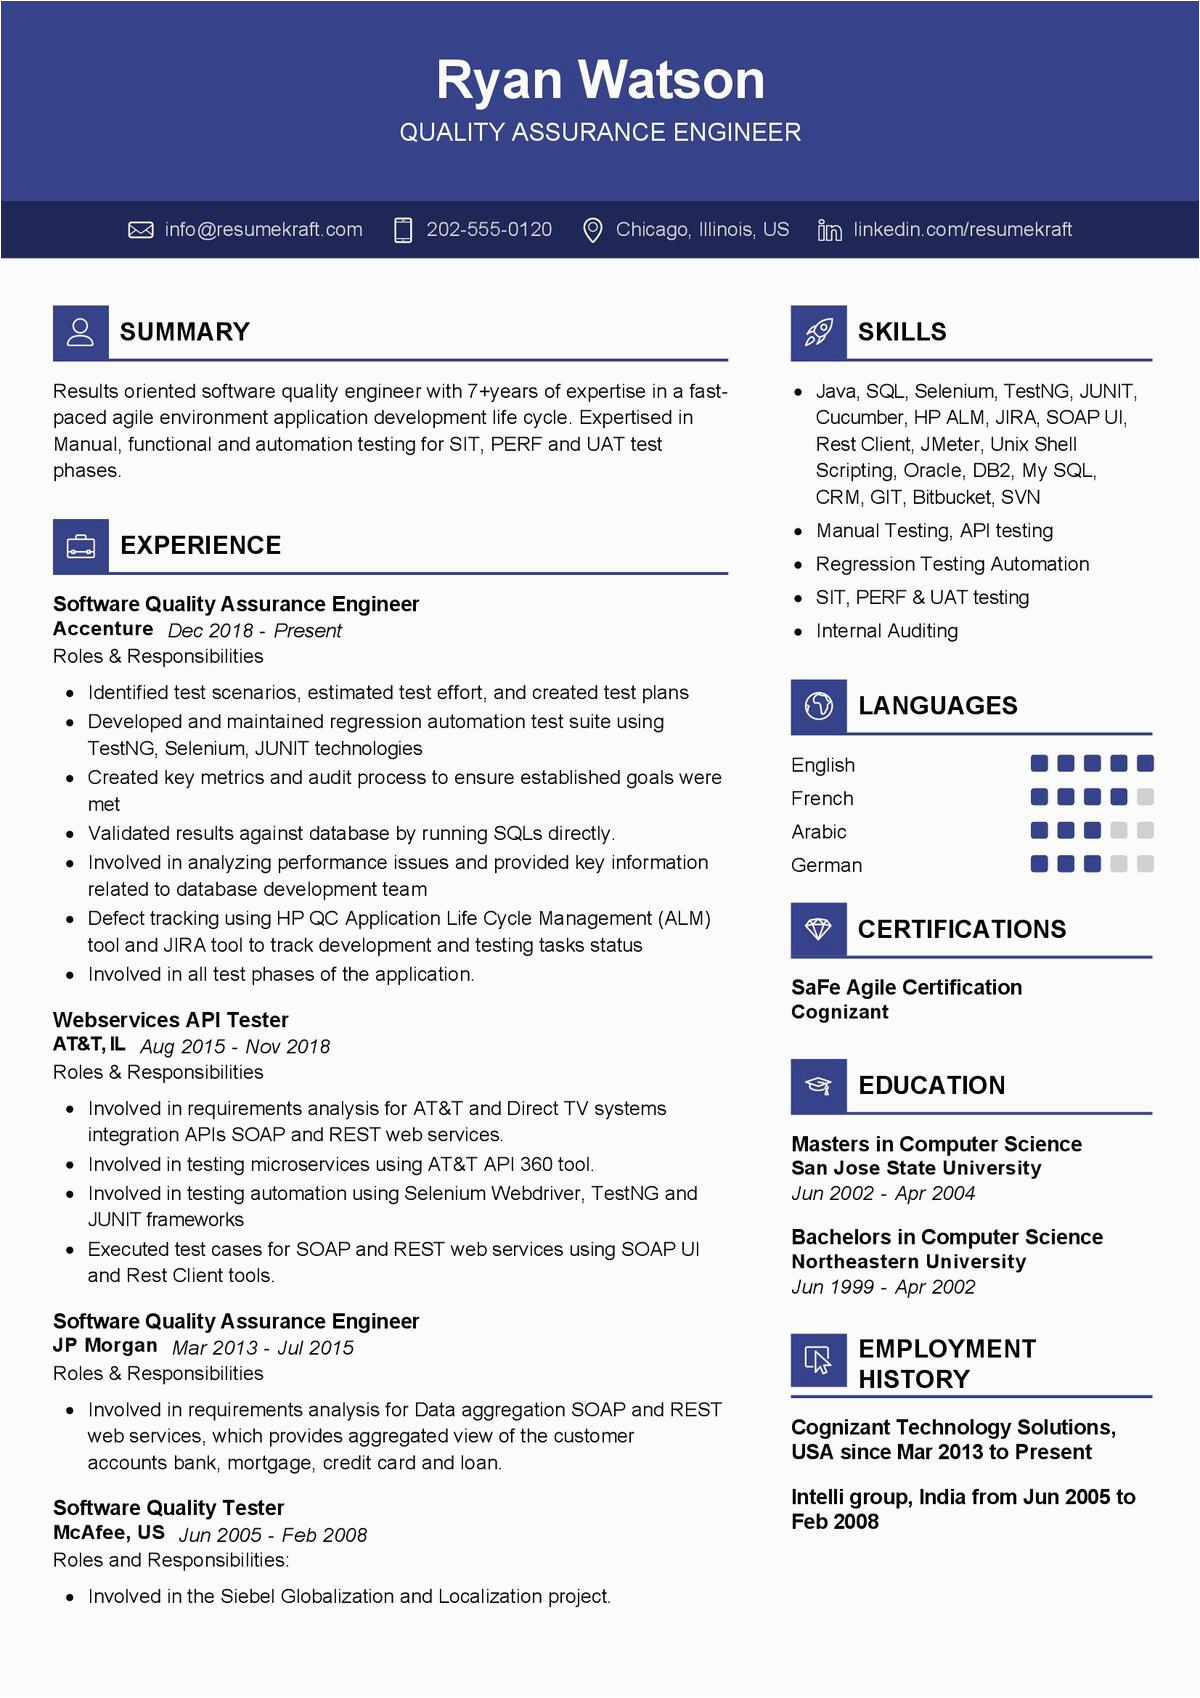 Software Quality assurance Engineer Resume Sample software Quality assurance Engineer Resume 2021